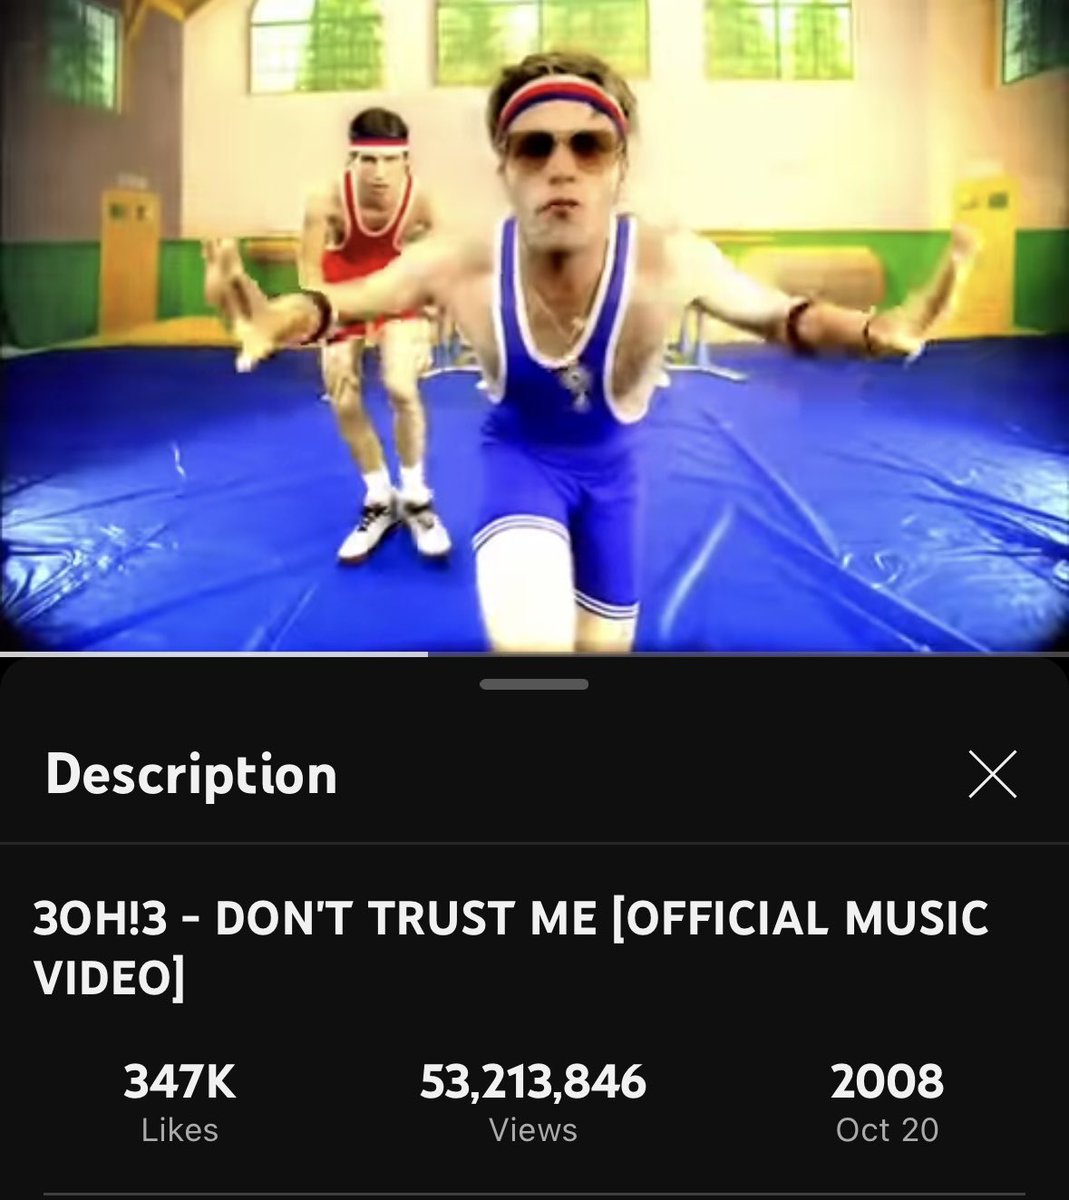 in honor of DONTTRUSTME by @3OH3 turning 15 today we will be playing this song on loop for 4 hours at all our shows this weekend. You’re welcome.